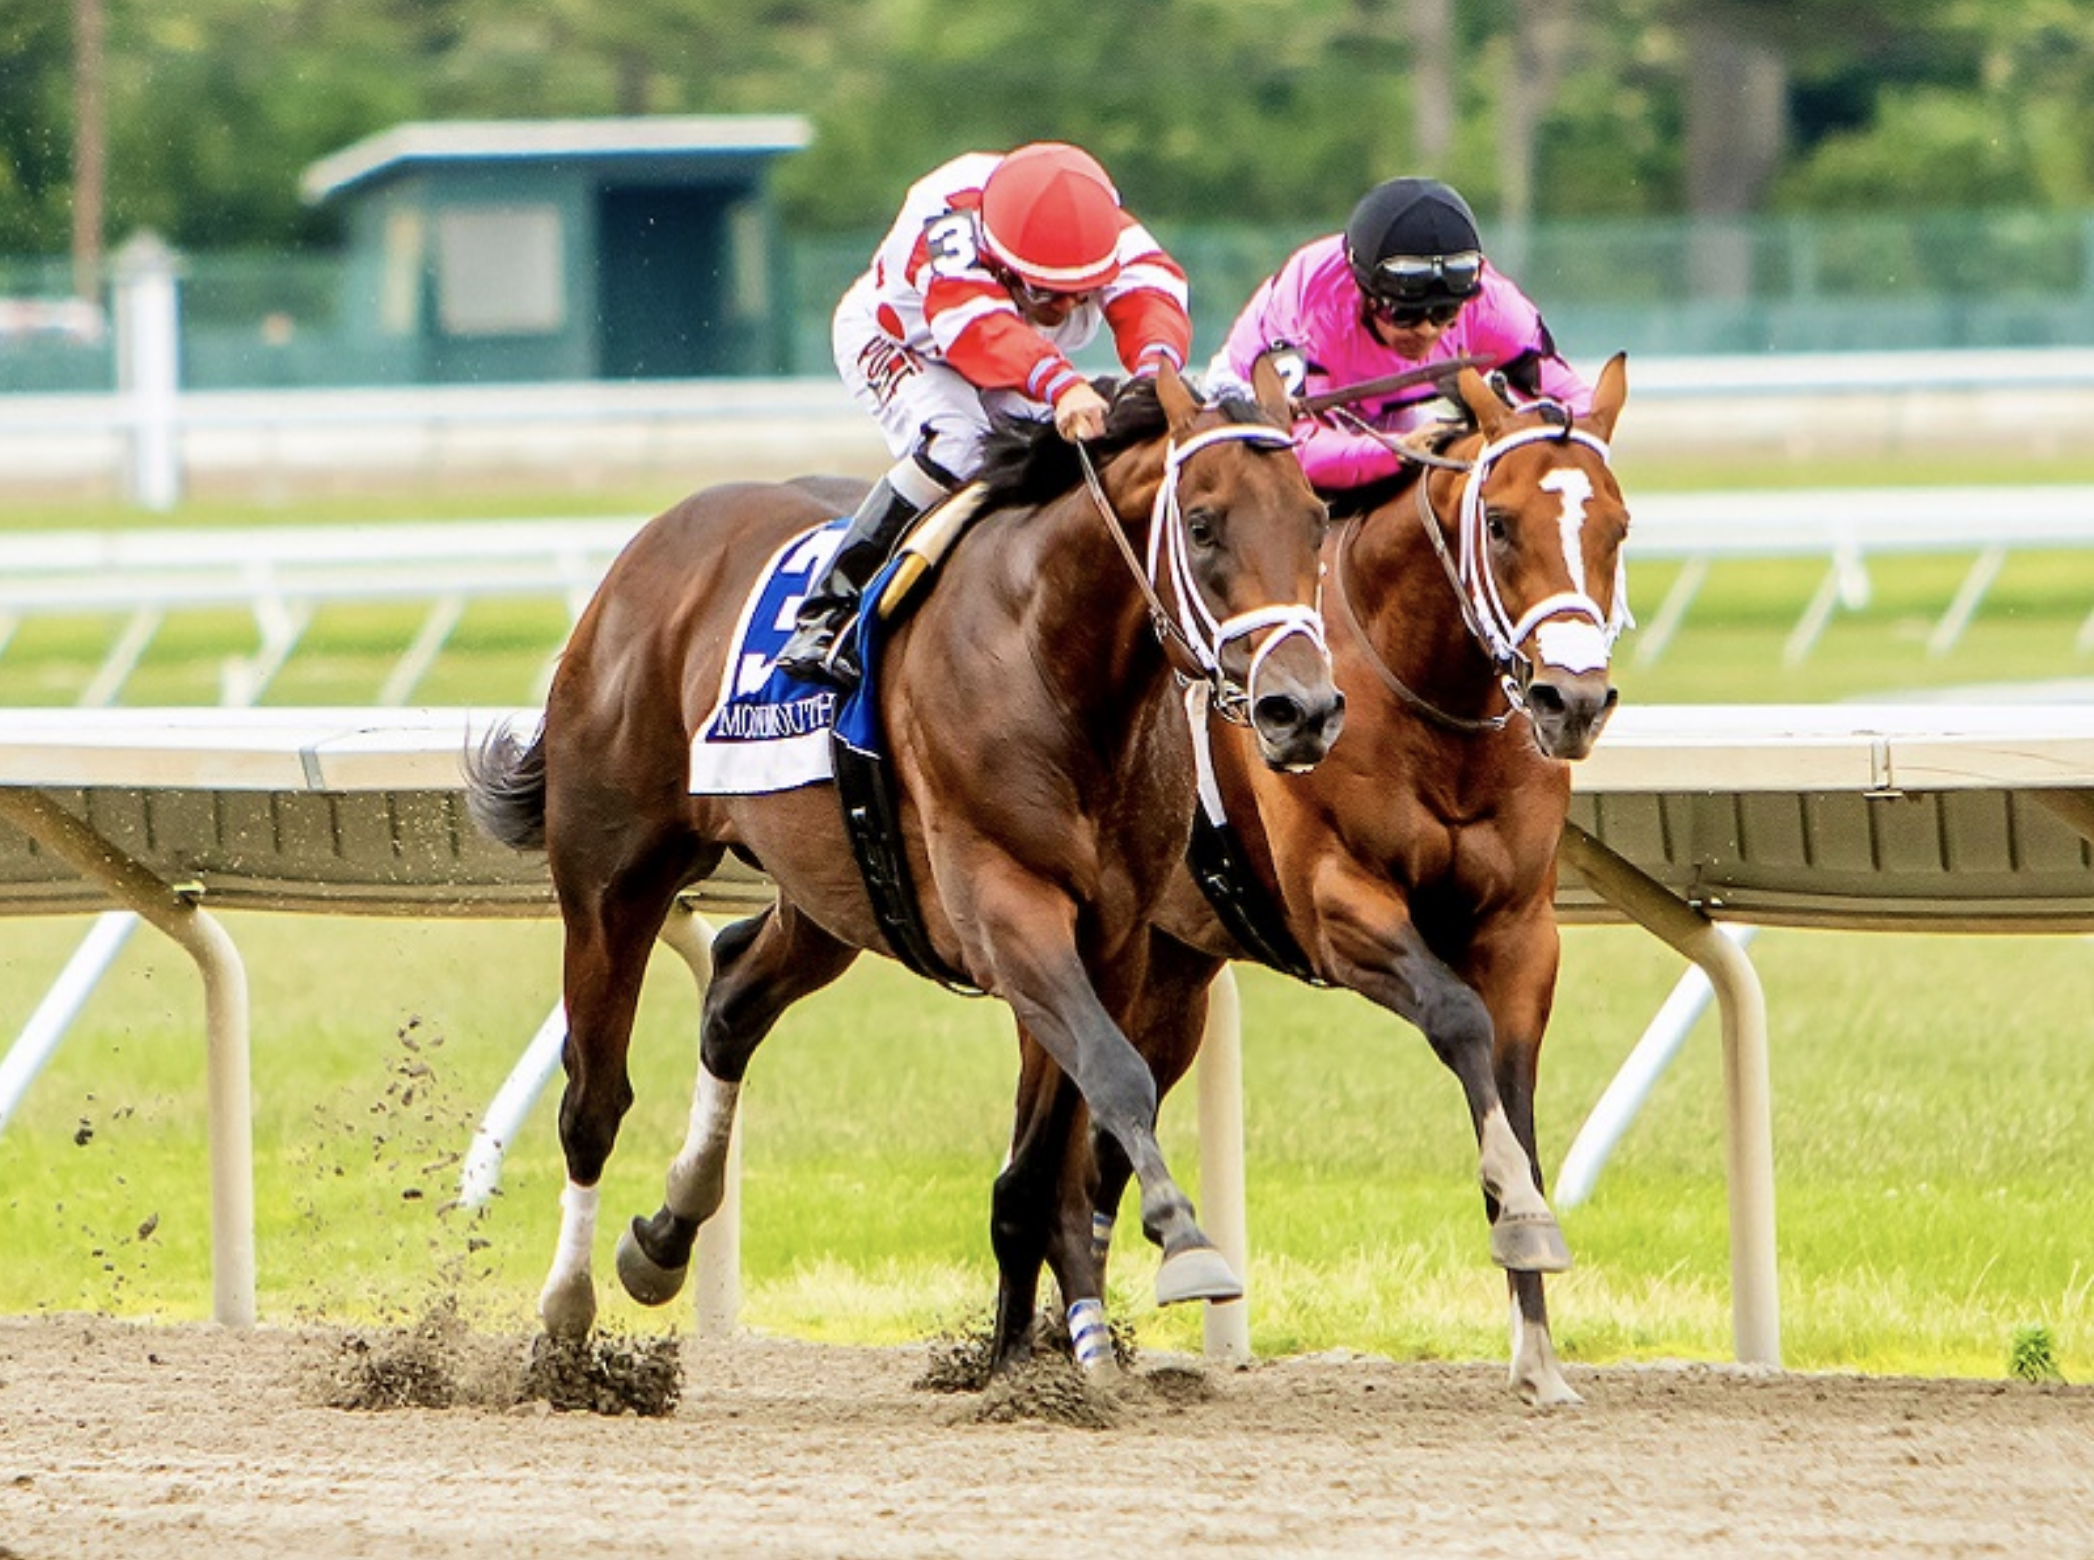 It’s Post Time by Jon White: Maximum Security Tops Haskell Field